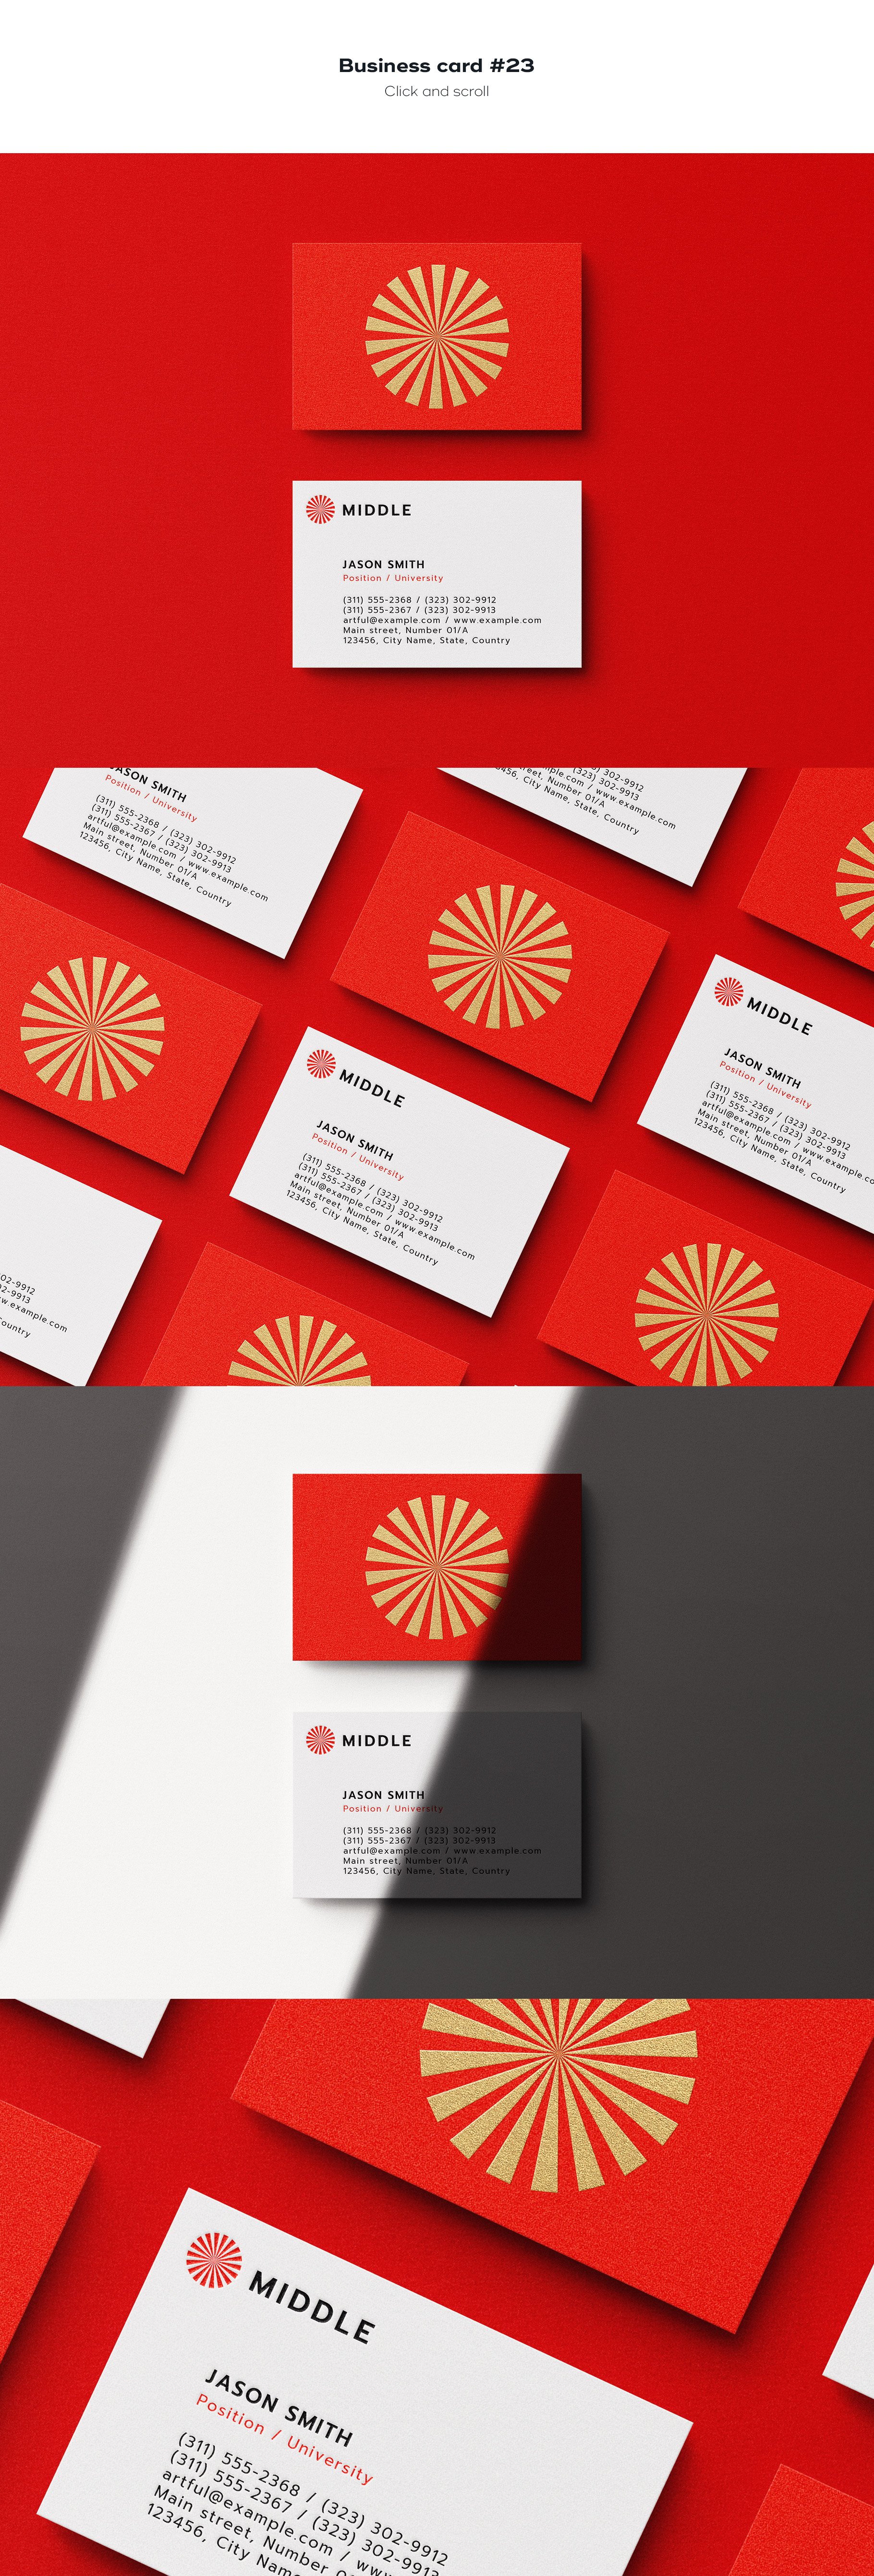 business card 23 853